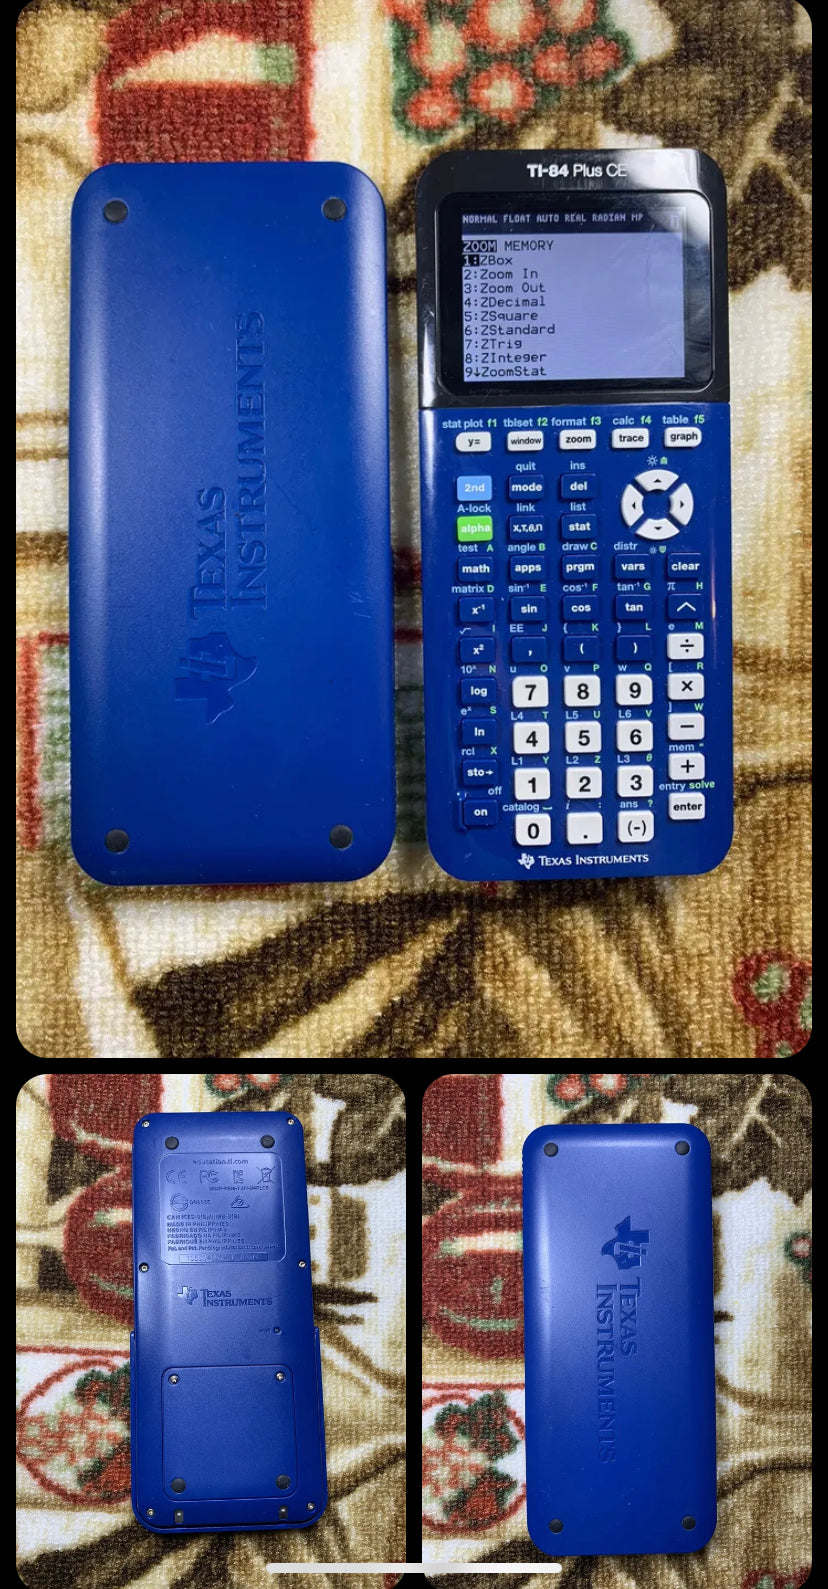 Texas Instruments ti-84 plus ce graphing calculator